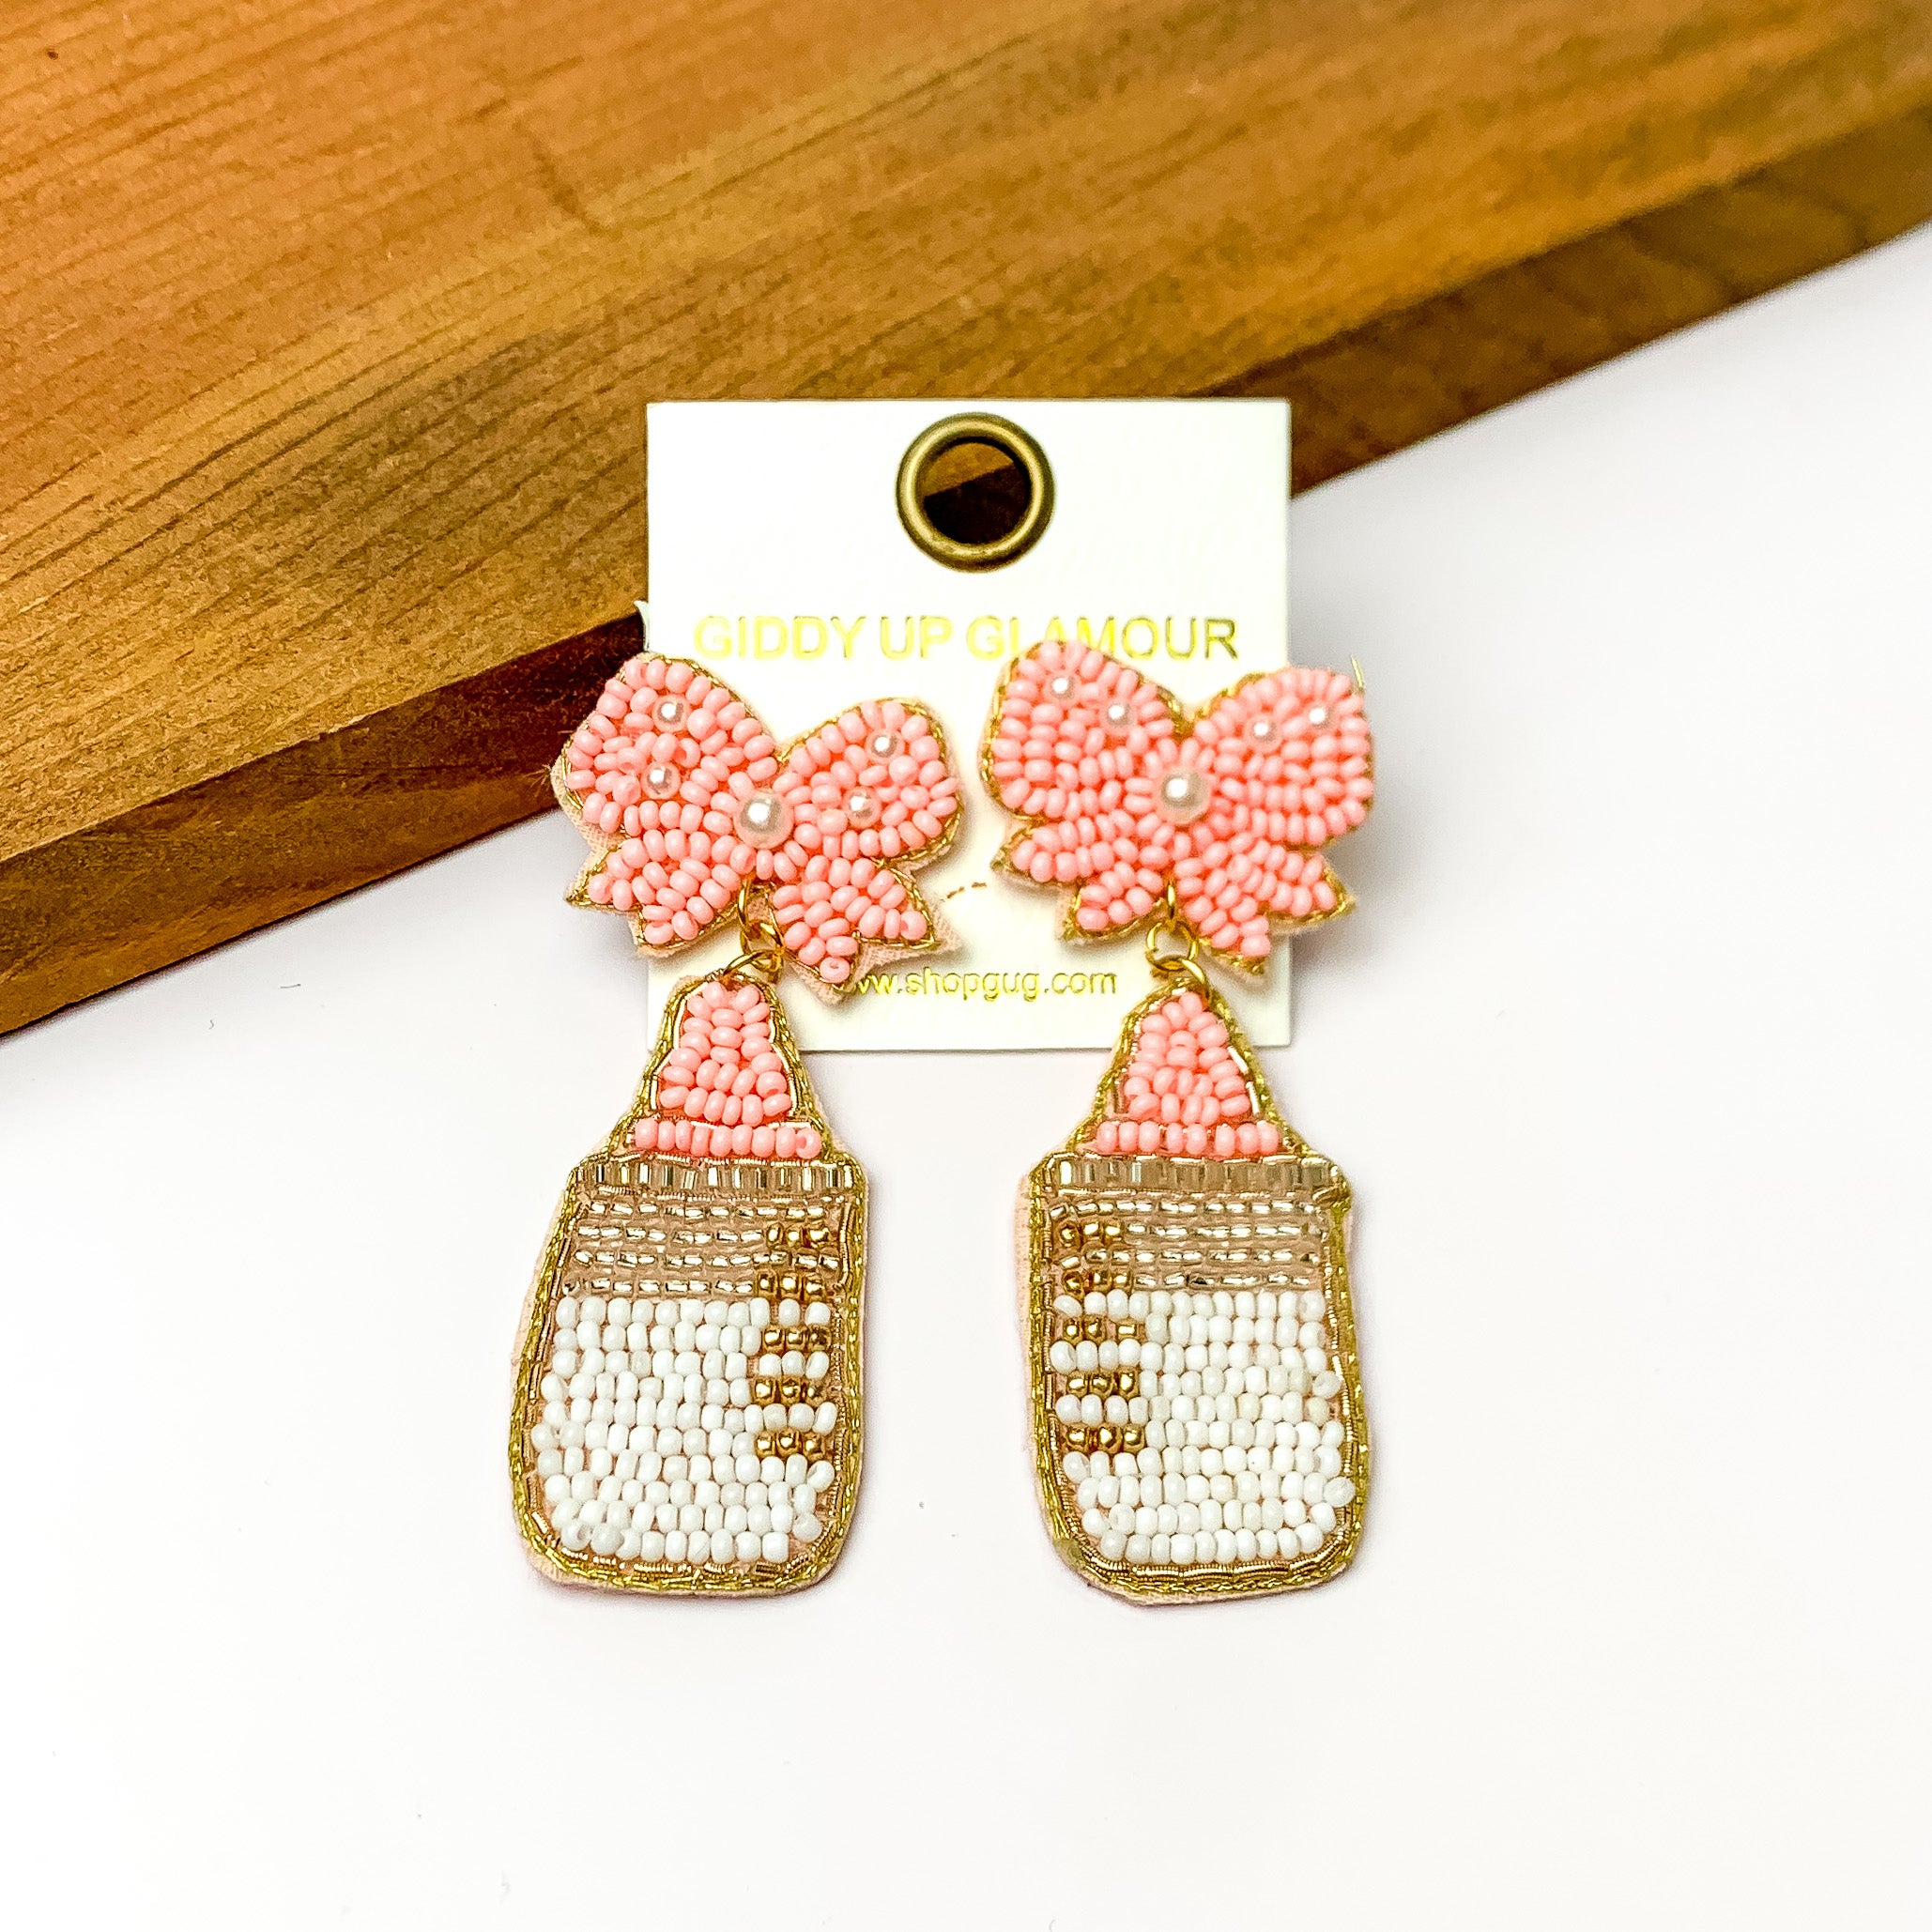 Baby Pink and White Beaded Bottle Earrings with Pink Bow Studs. Pictured on a white background with a wood piece at the top.